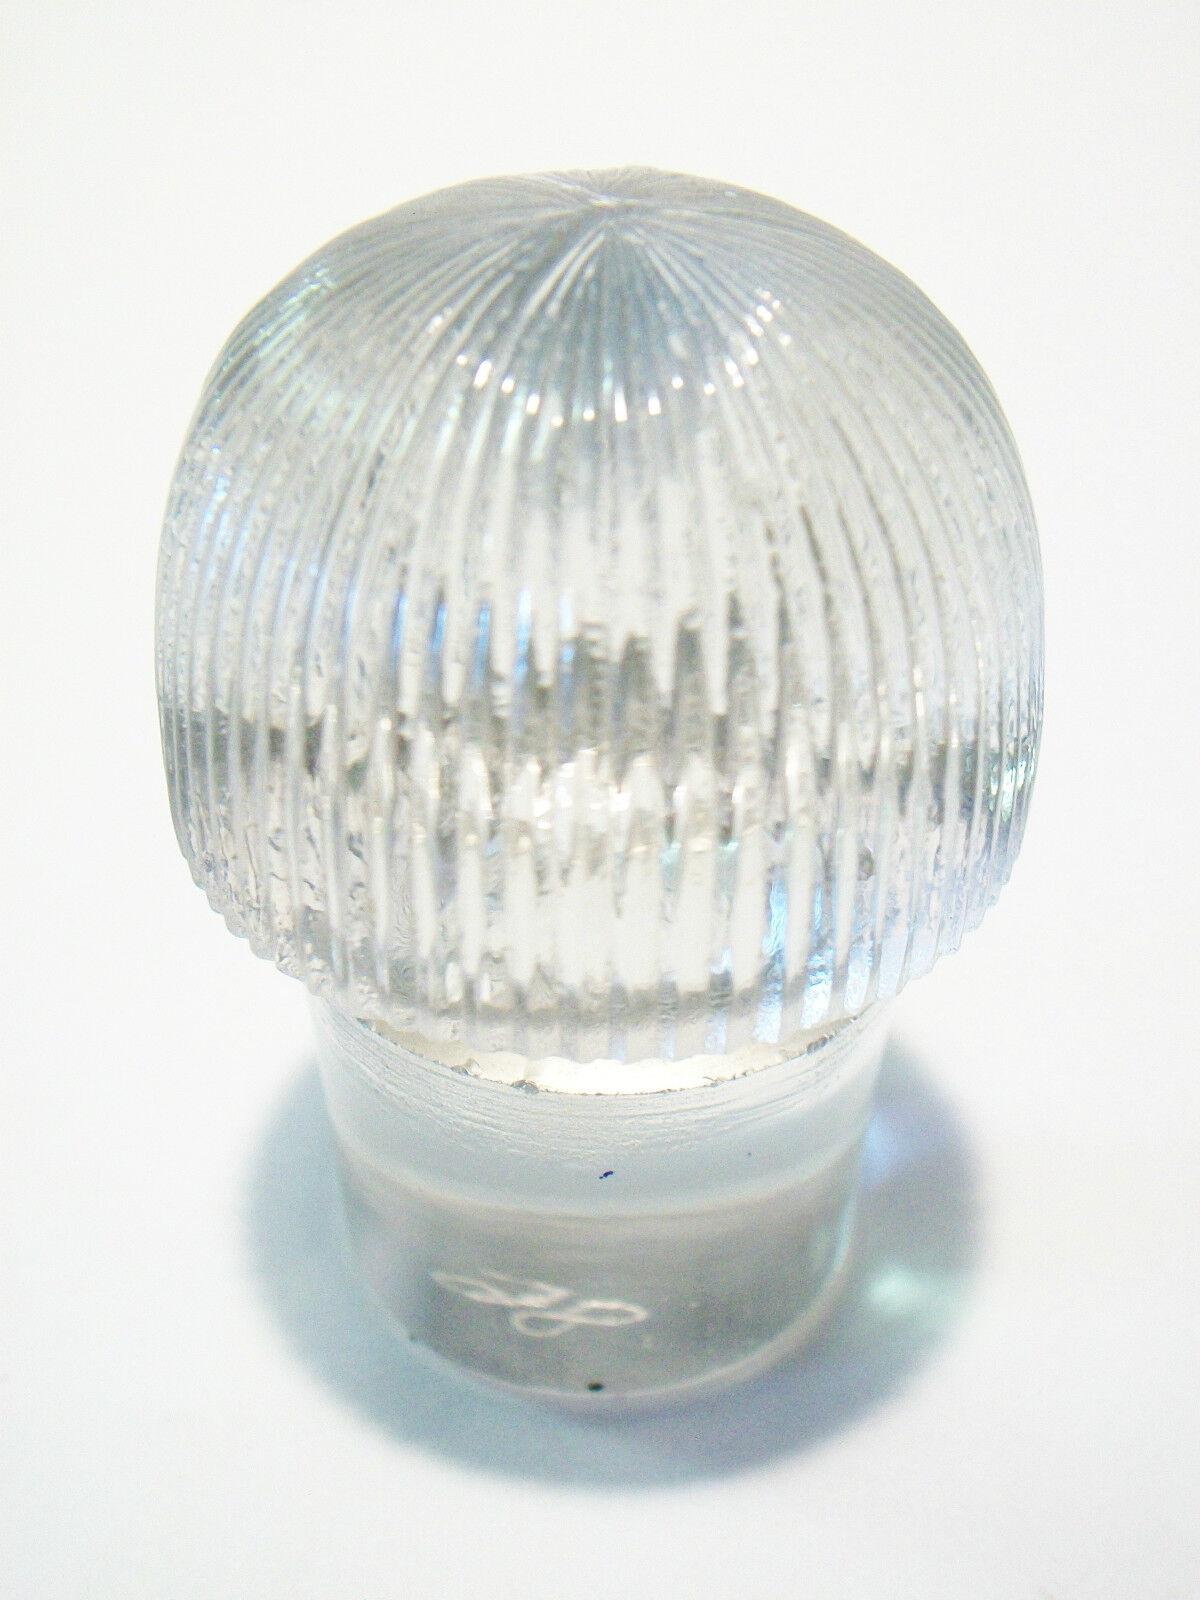 Hand-Crafted R. LALIQUE - Antique Stopper - Clear Glass - Mushroom Shape - Early 20th Century For Sale